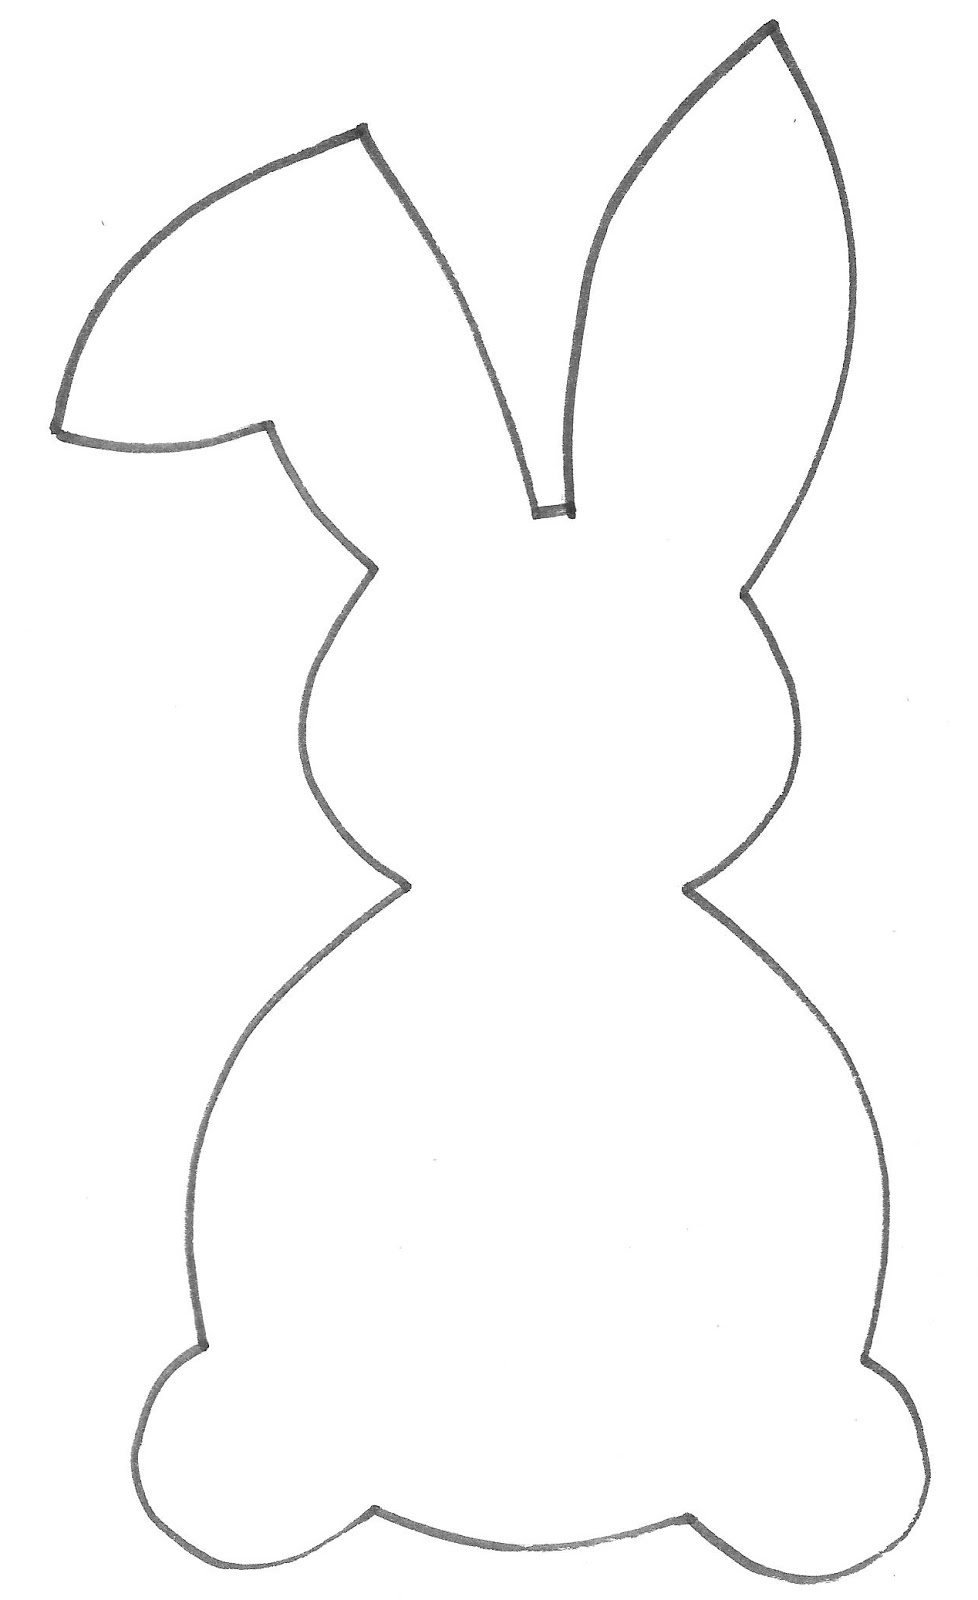 Free Rabbit Silhouette Printable Download Free Rabbit Silhouette Printable Png Images Free Cliparts On Clipart Library